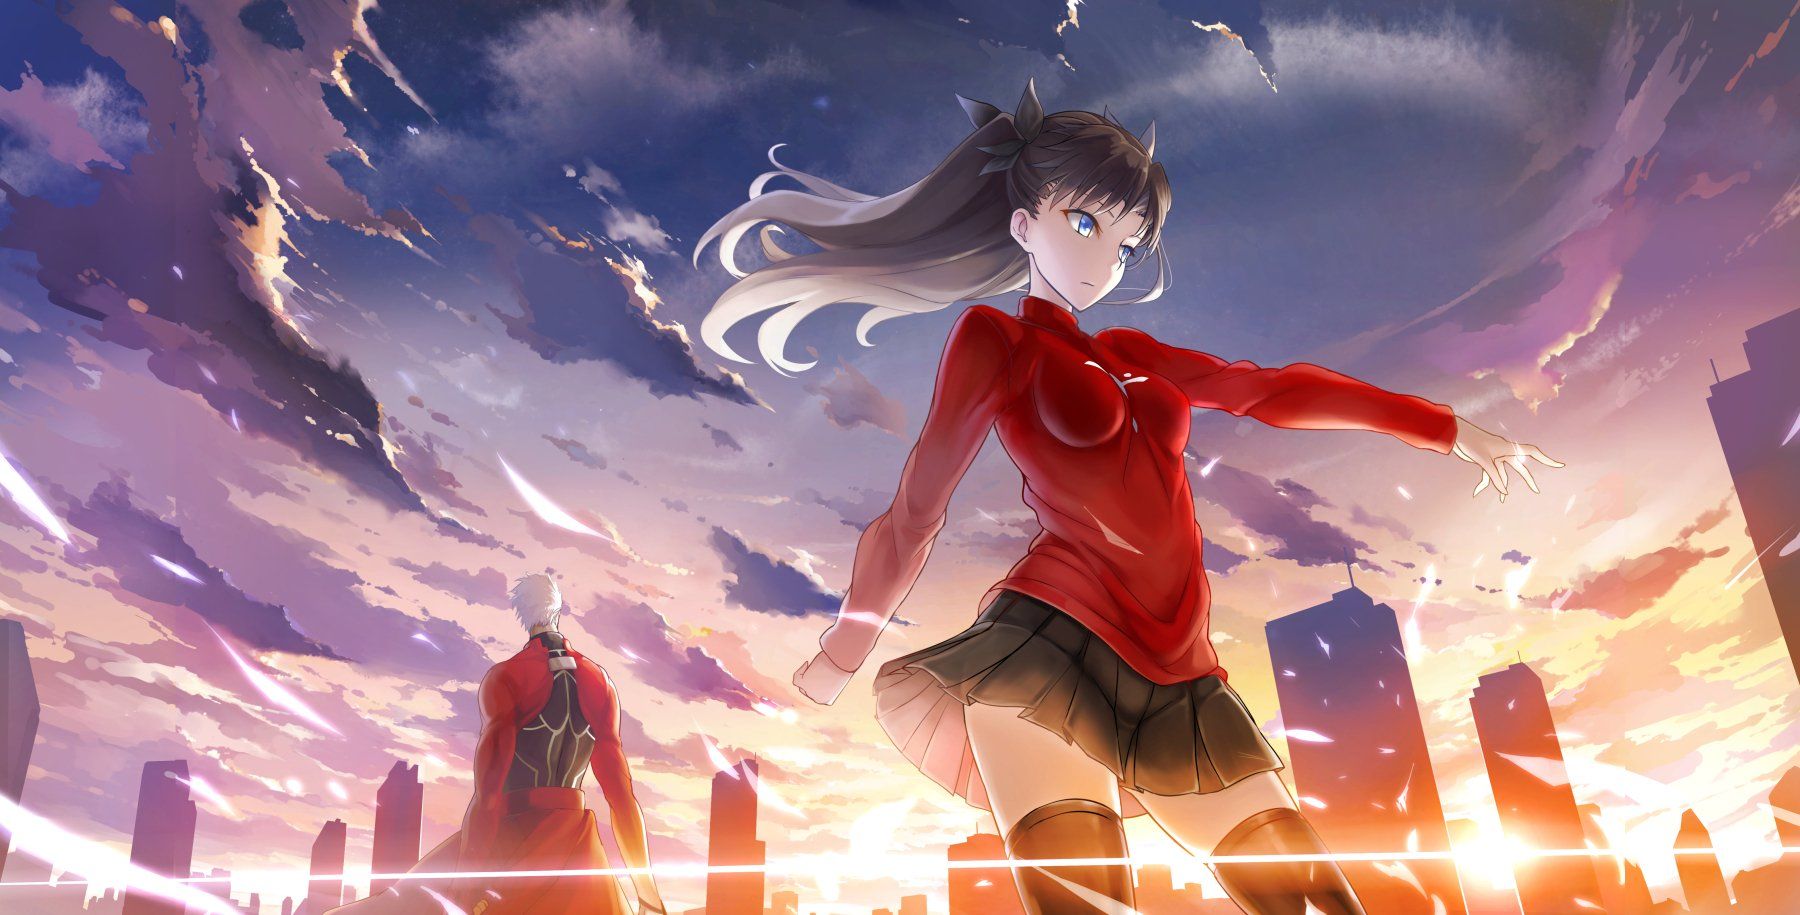 Free Download Archer Rin Tohsaka Wallpaper And Background 1800x915 [1800x915] For Your Desktop, Mobile & Tablet. Explore Archer Fate Stay Night Wallpaper. Archer Fate Stay Night Wallpaper, Fate Stay Night Wallpaper, Fate